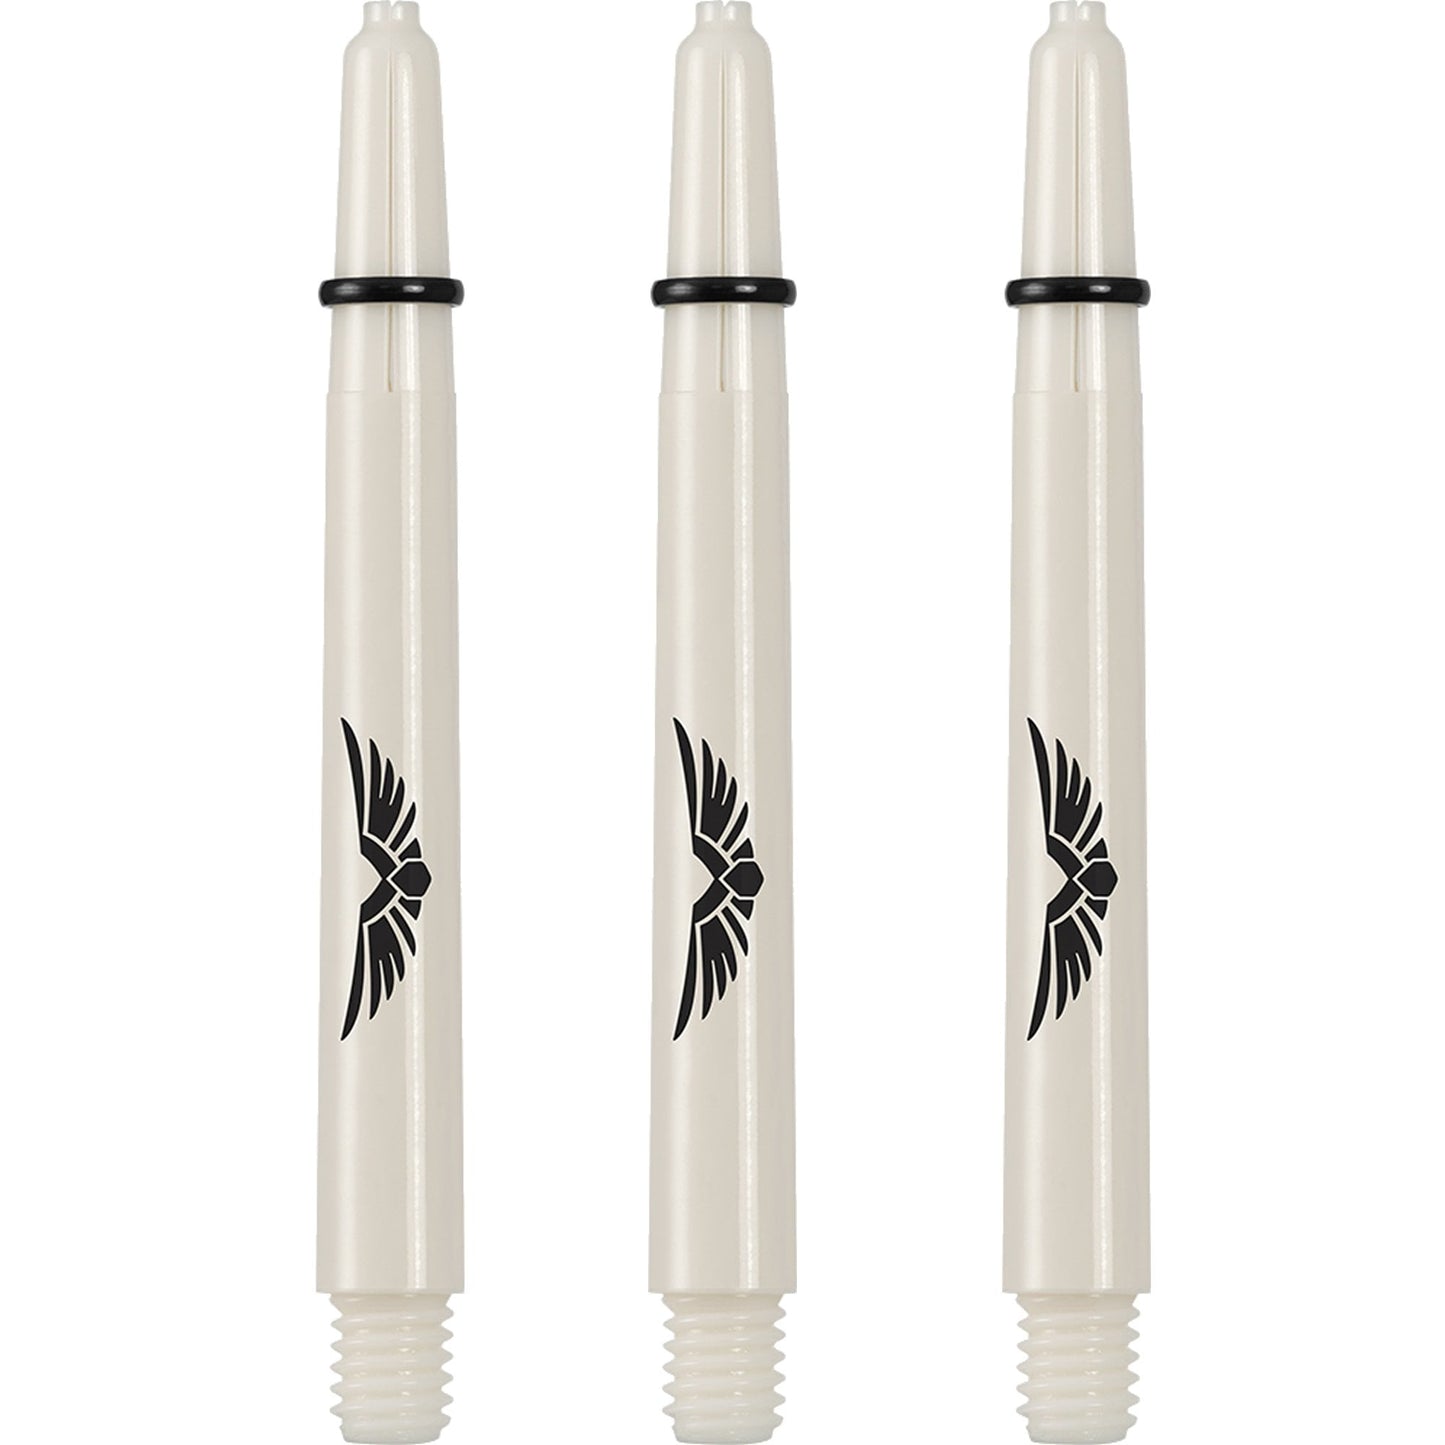 Shot Eagle Claw Dart Shafts - with Machined Rings - Strong Polycarbonate Stems - Bone White Medium